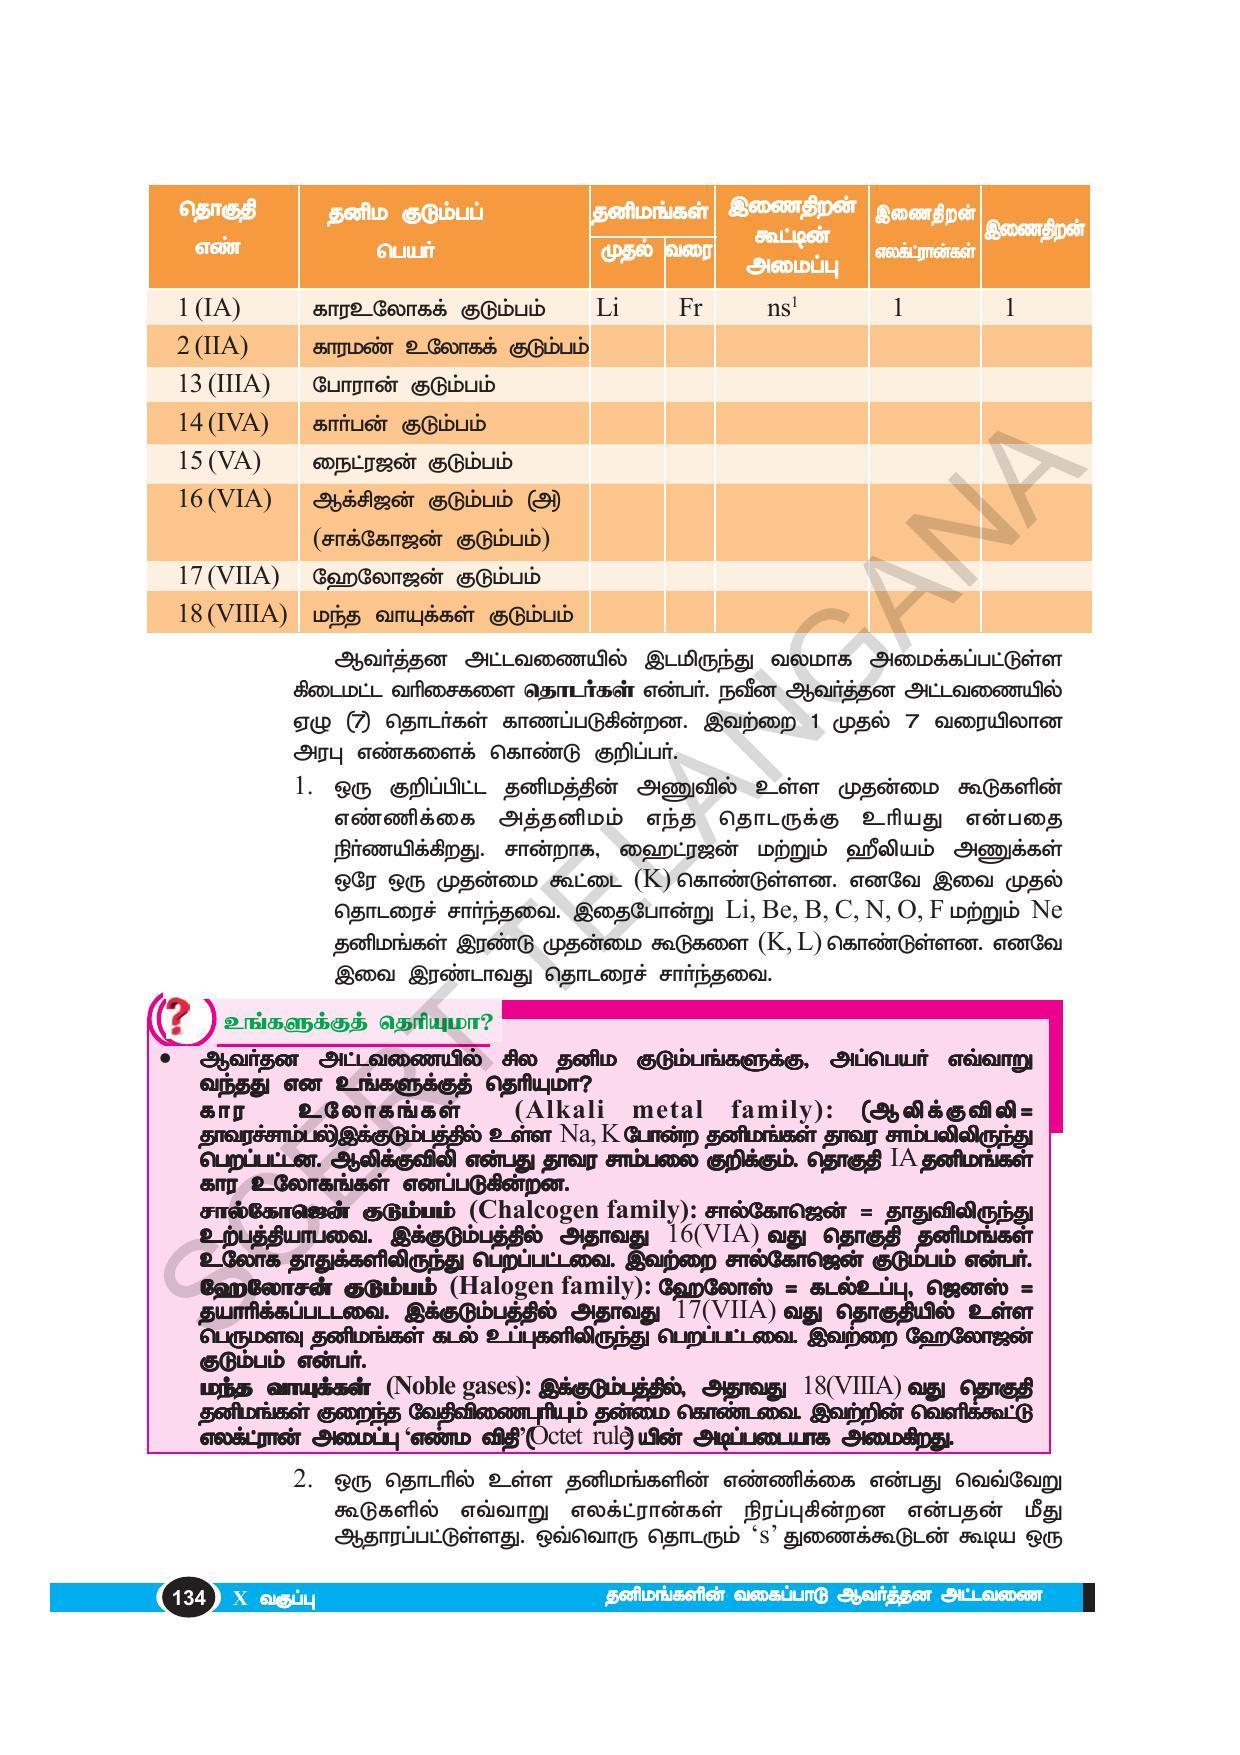 TS SCERT Class 10 Physical Science(Tamil Medium) Text Book - Page 146